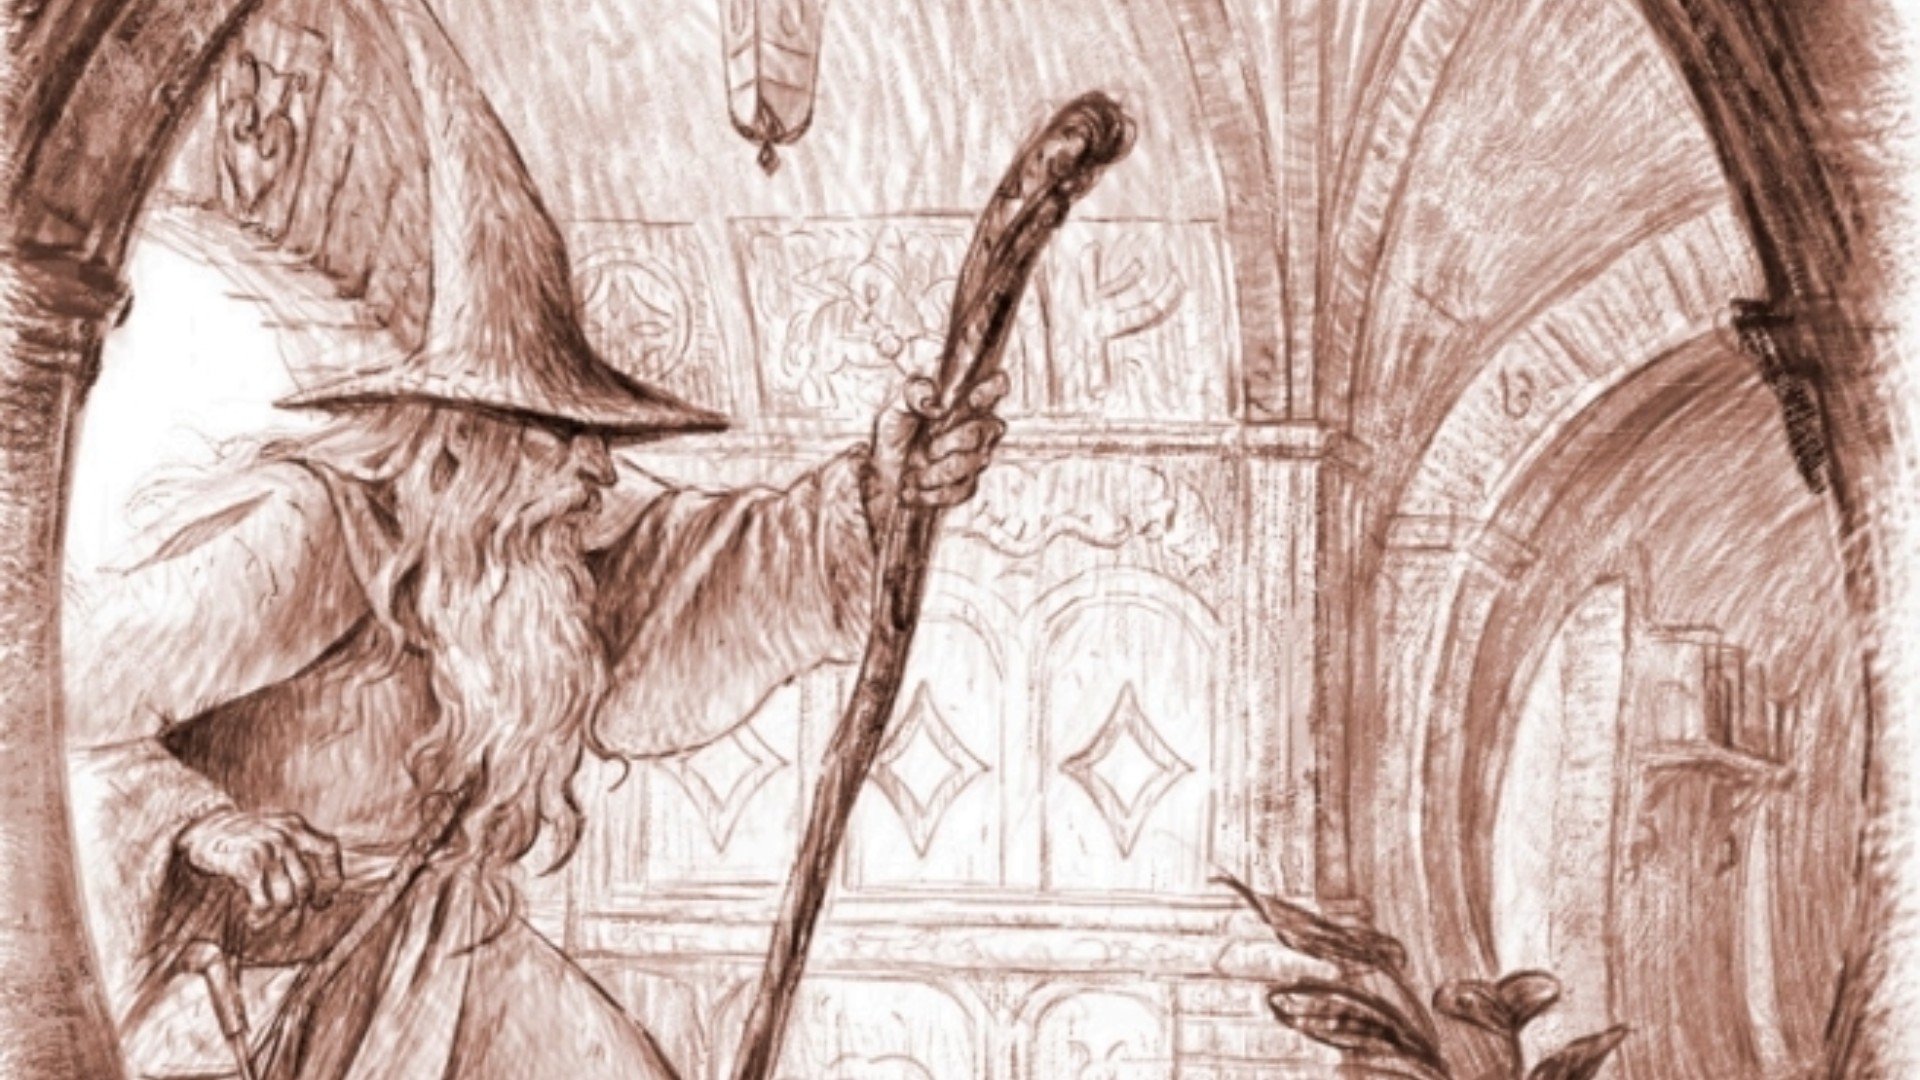 A Pencil-like sketch of an old man with a pointed hat, cloak, and staff walking into a house with a round door. 